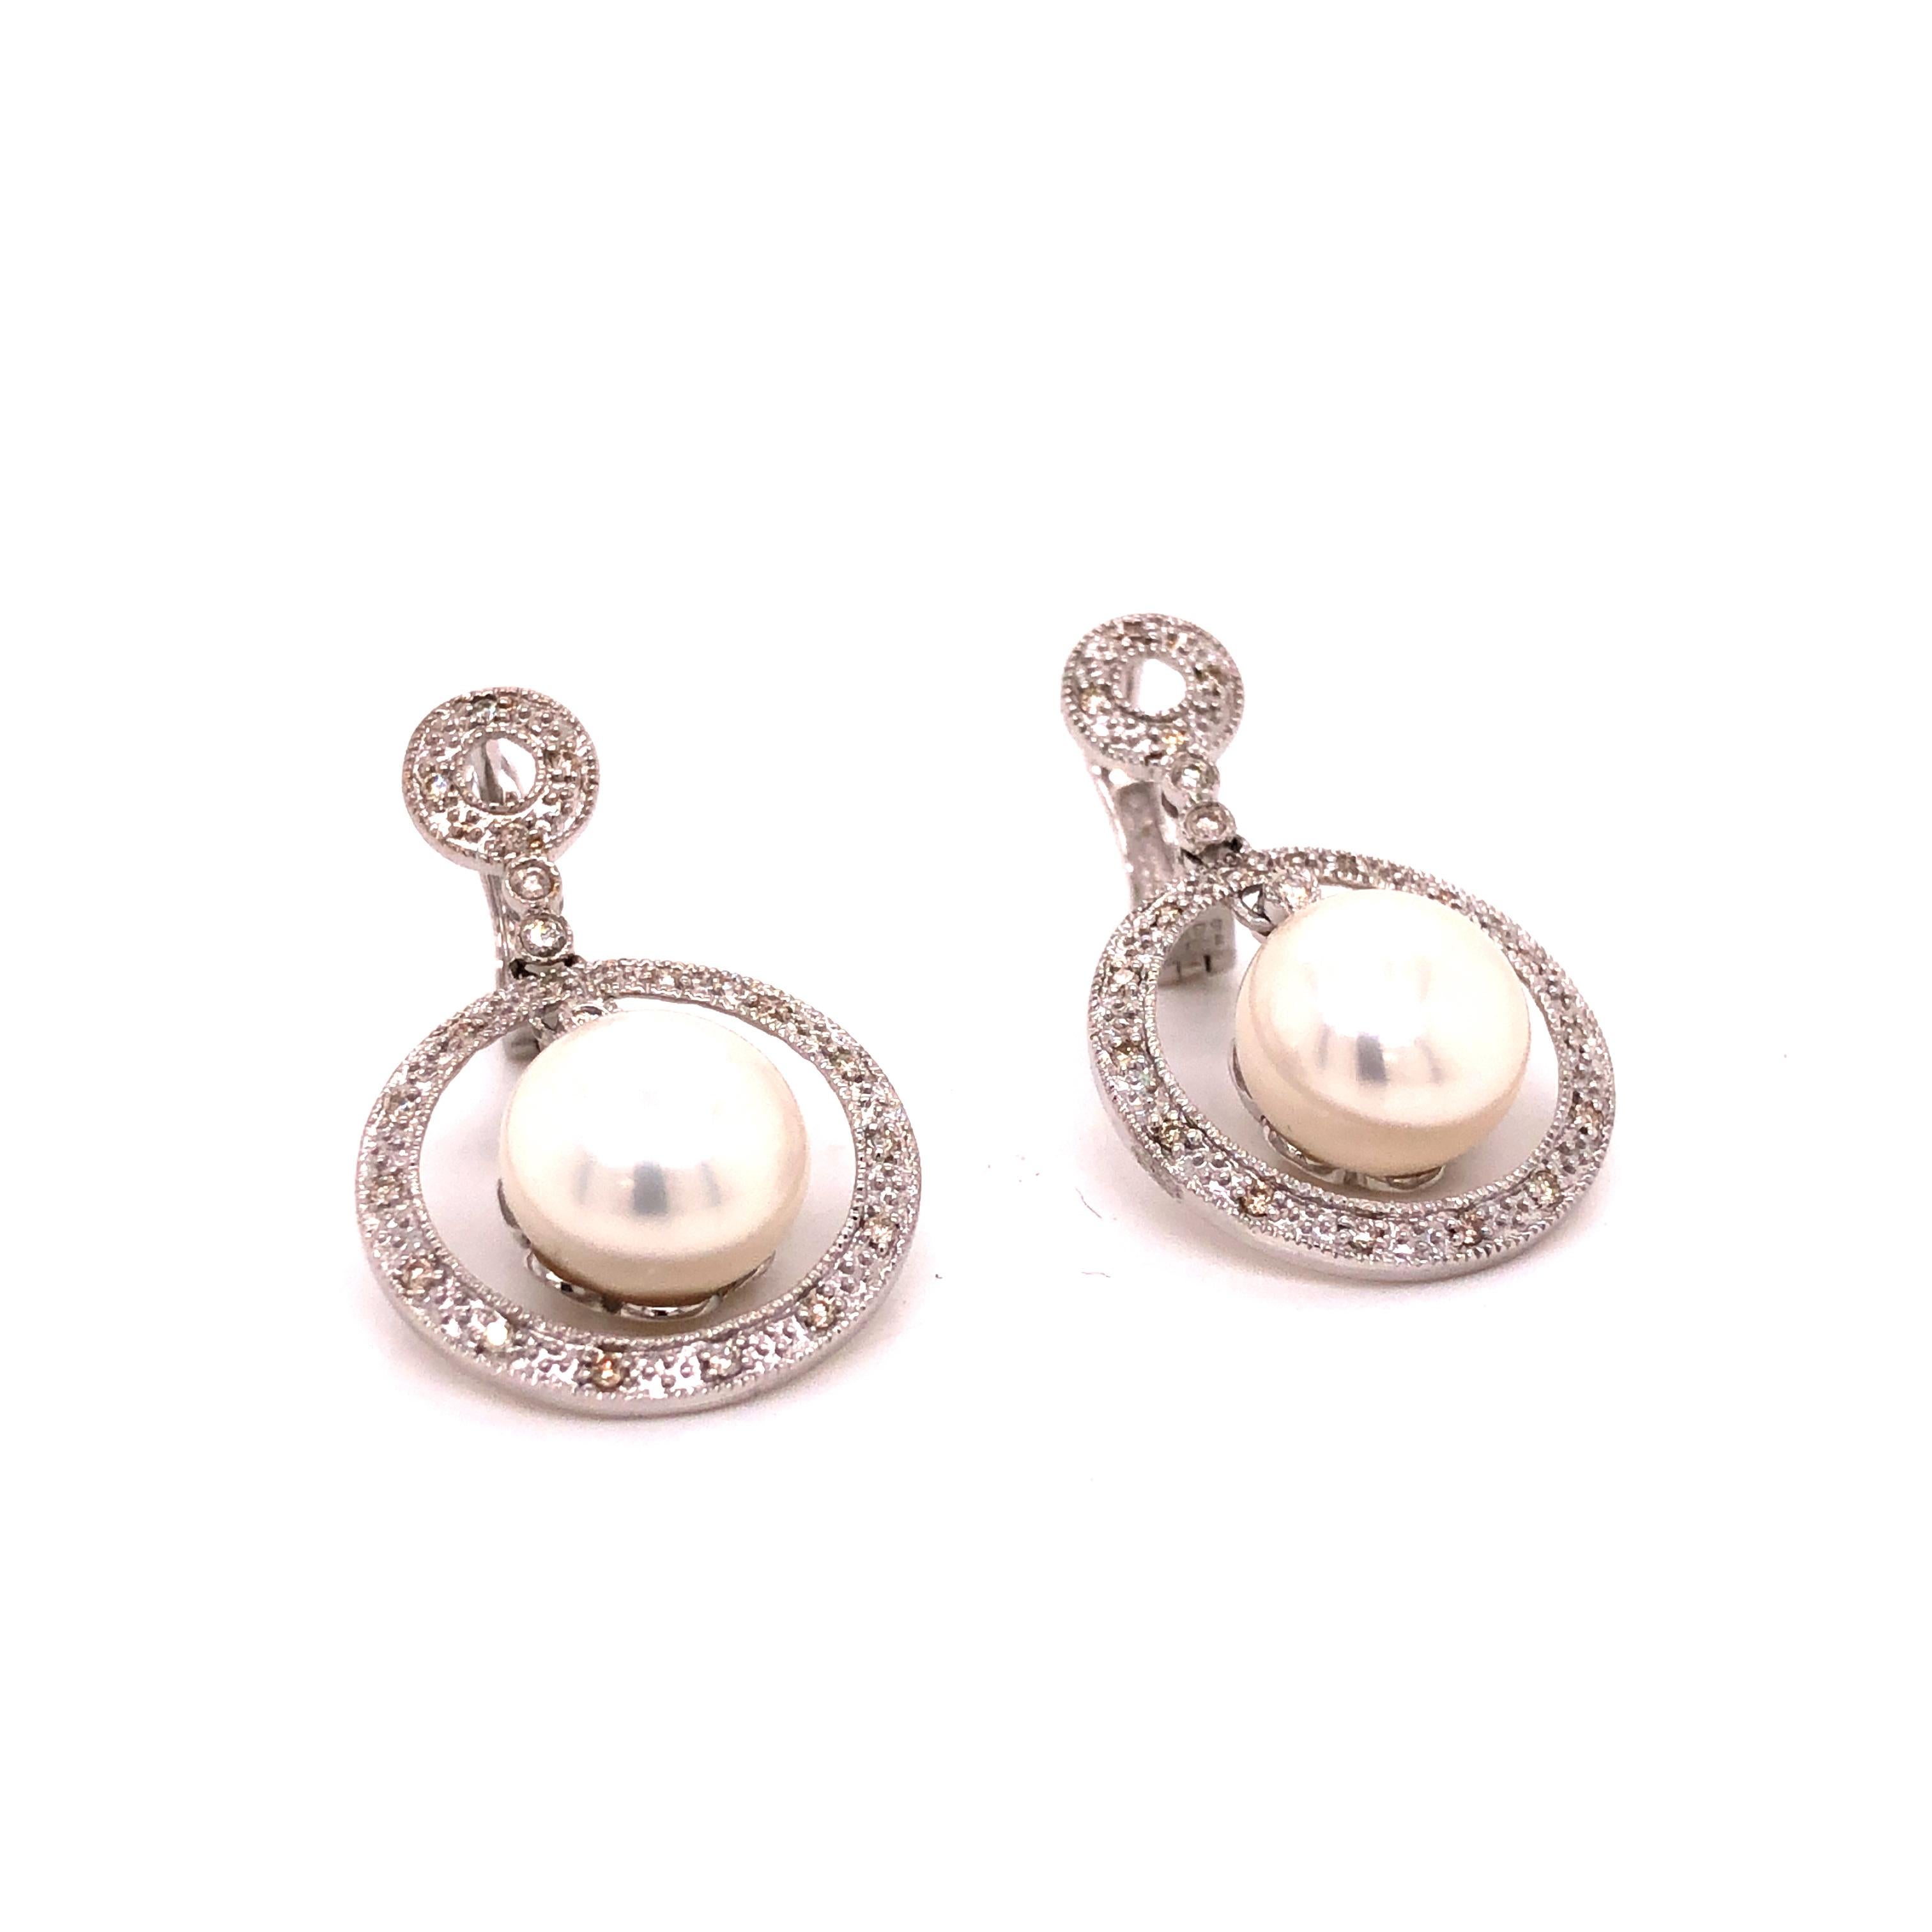 A pair of 14K White Gold Diamond Cultured Pearl Earrings. Diamond weight ~ .28 carat